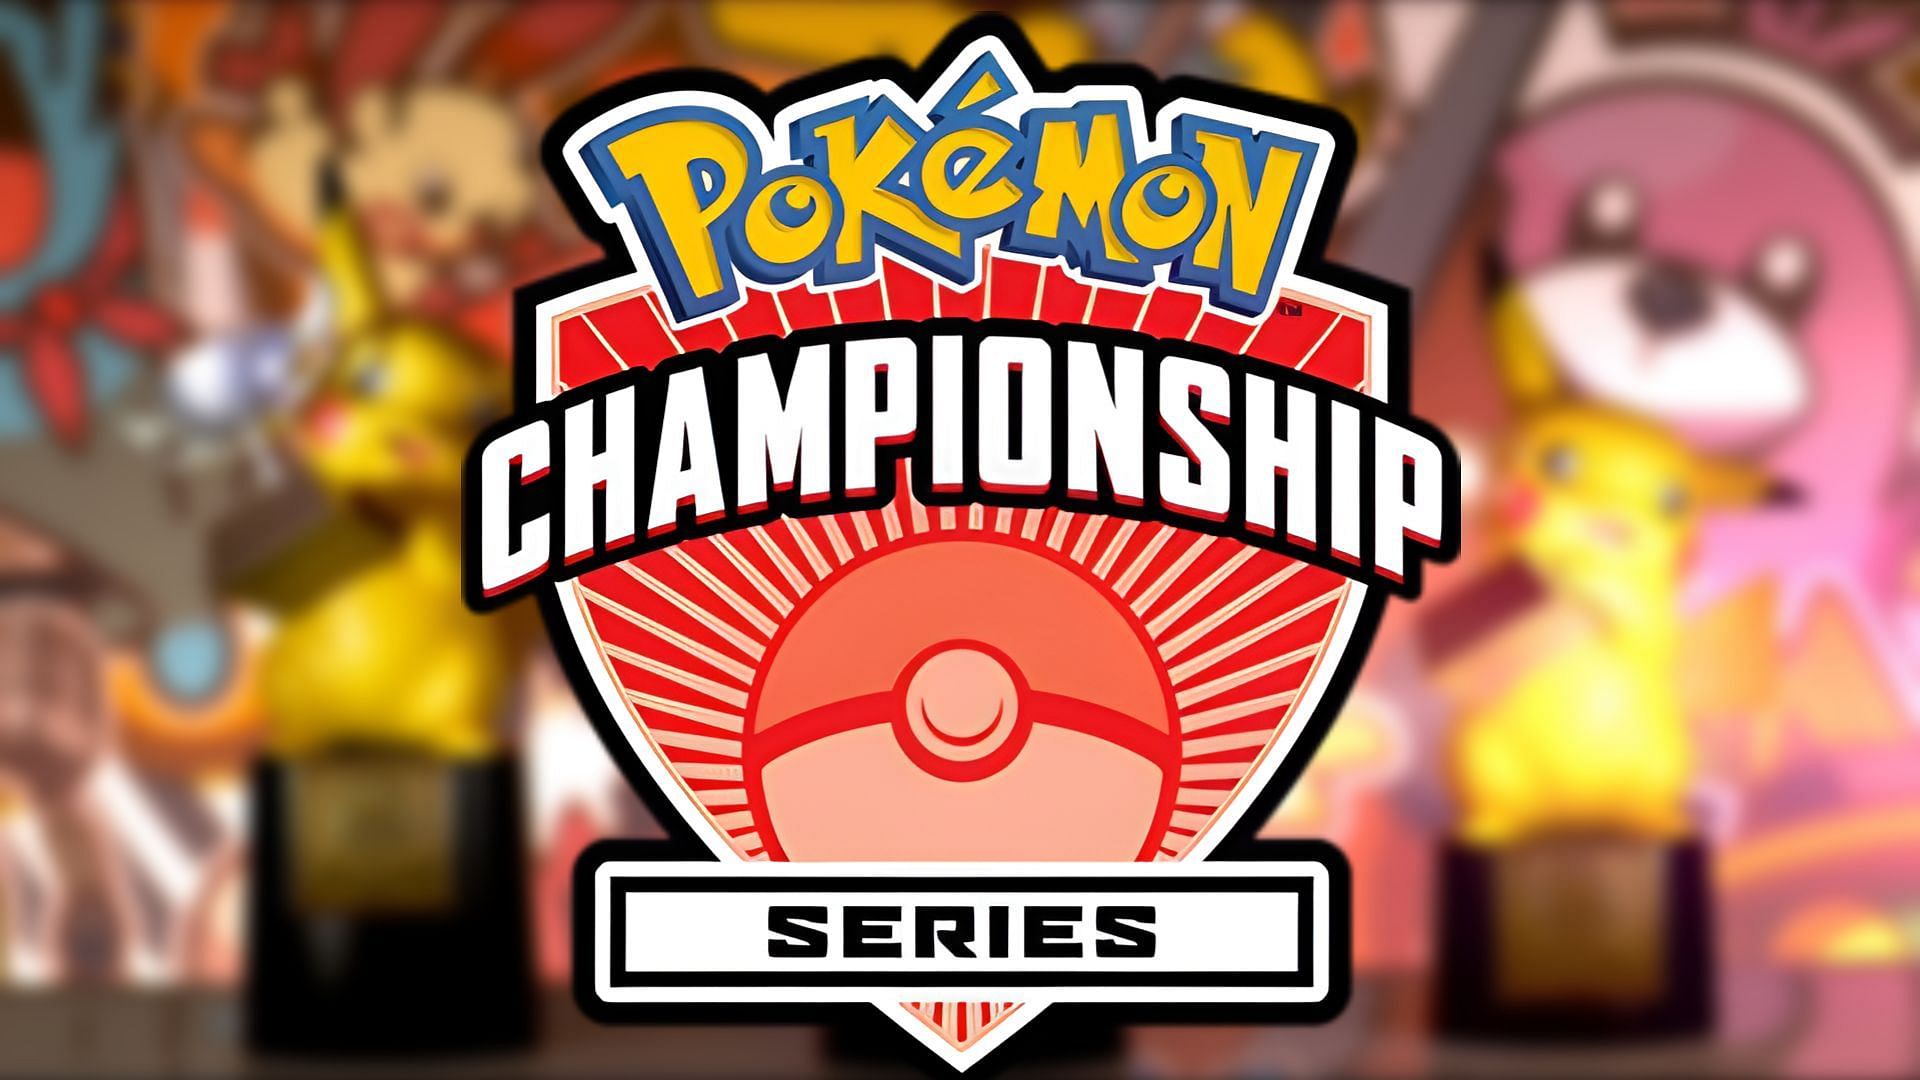 The Pokemon VGC logo against the backdrop of World Championship trophies.